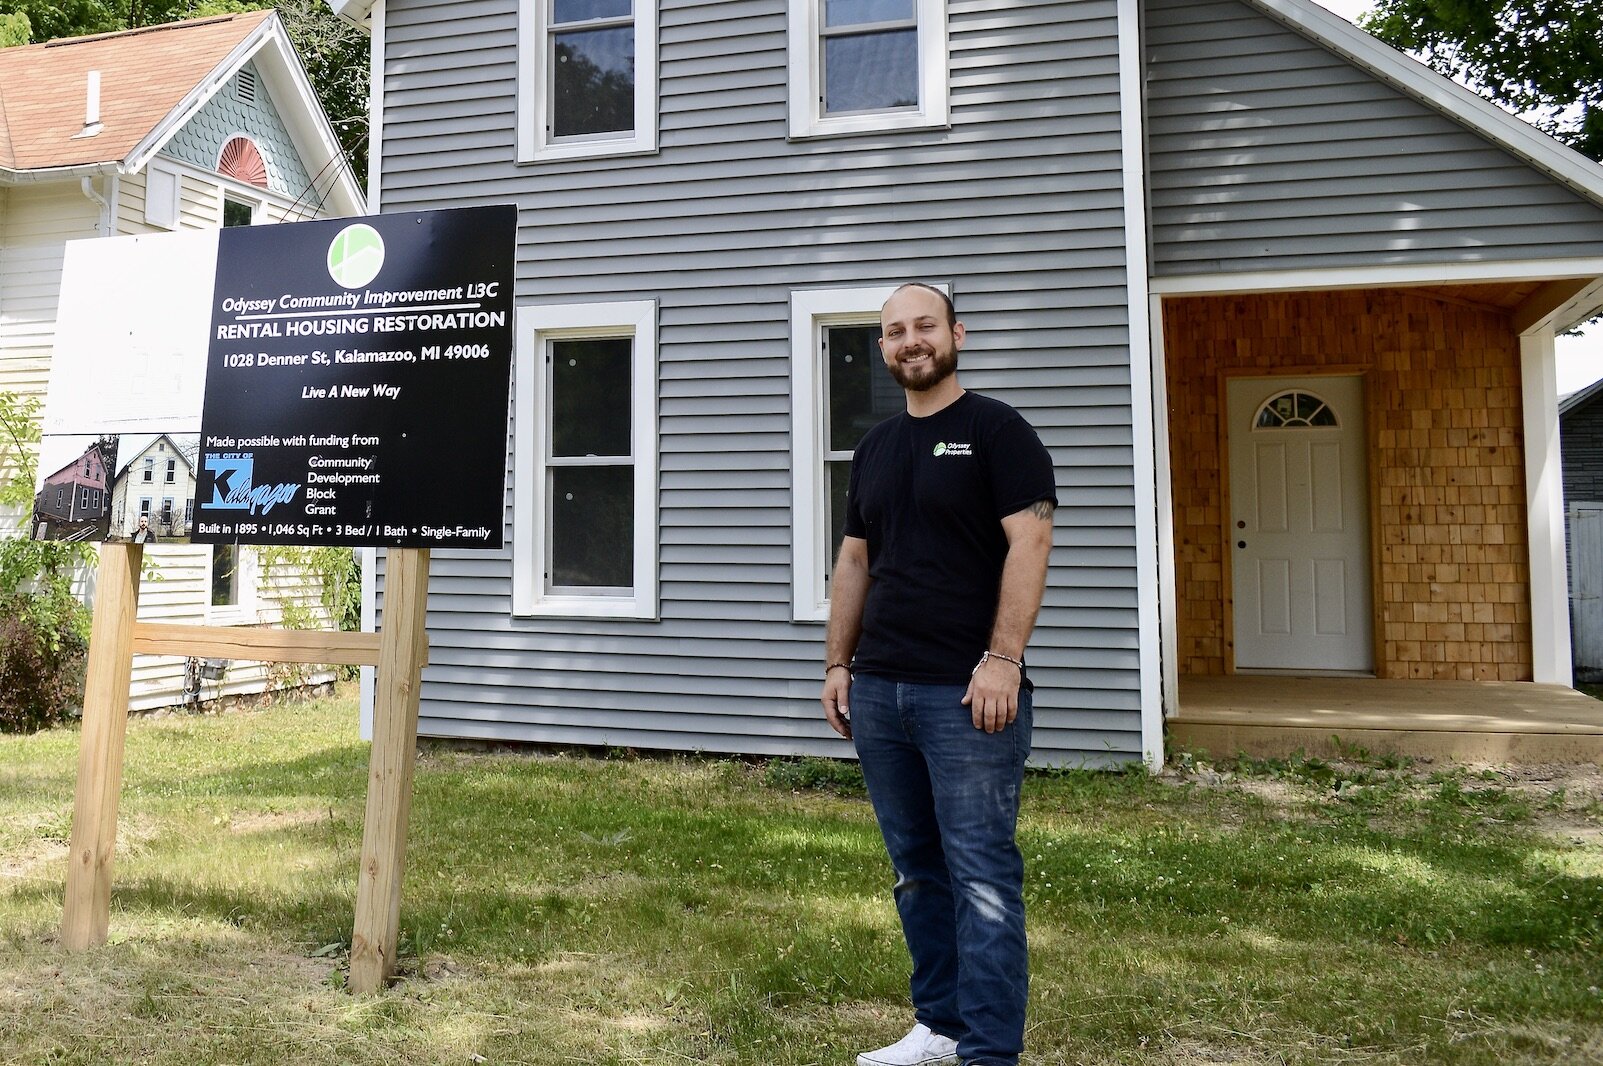 Jake Tardani's Odyssey Properties has added new siding, windows and doors to what was a dilapidated house at 1028 Denner St.